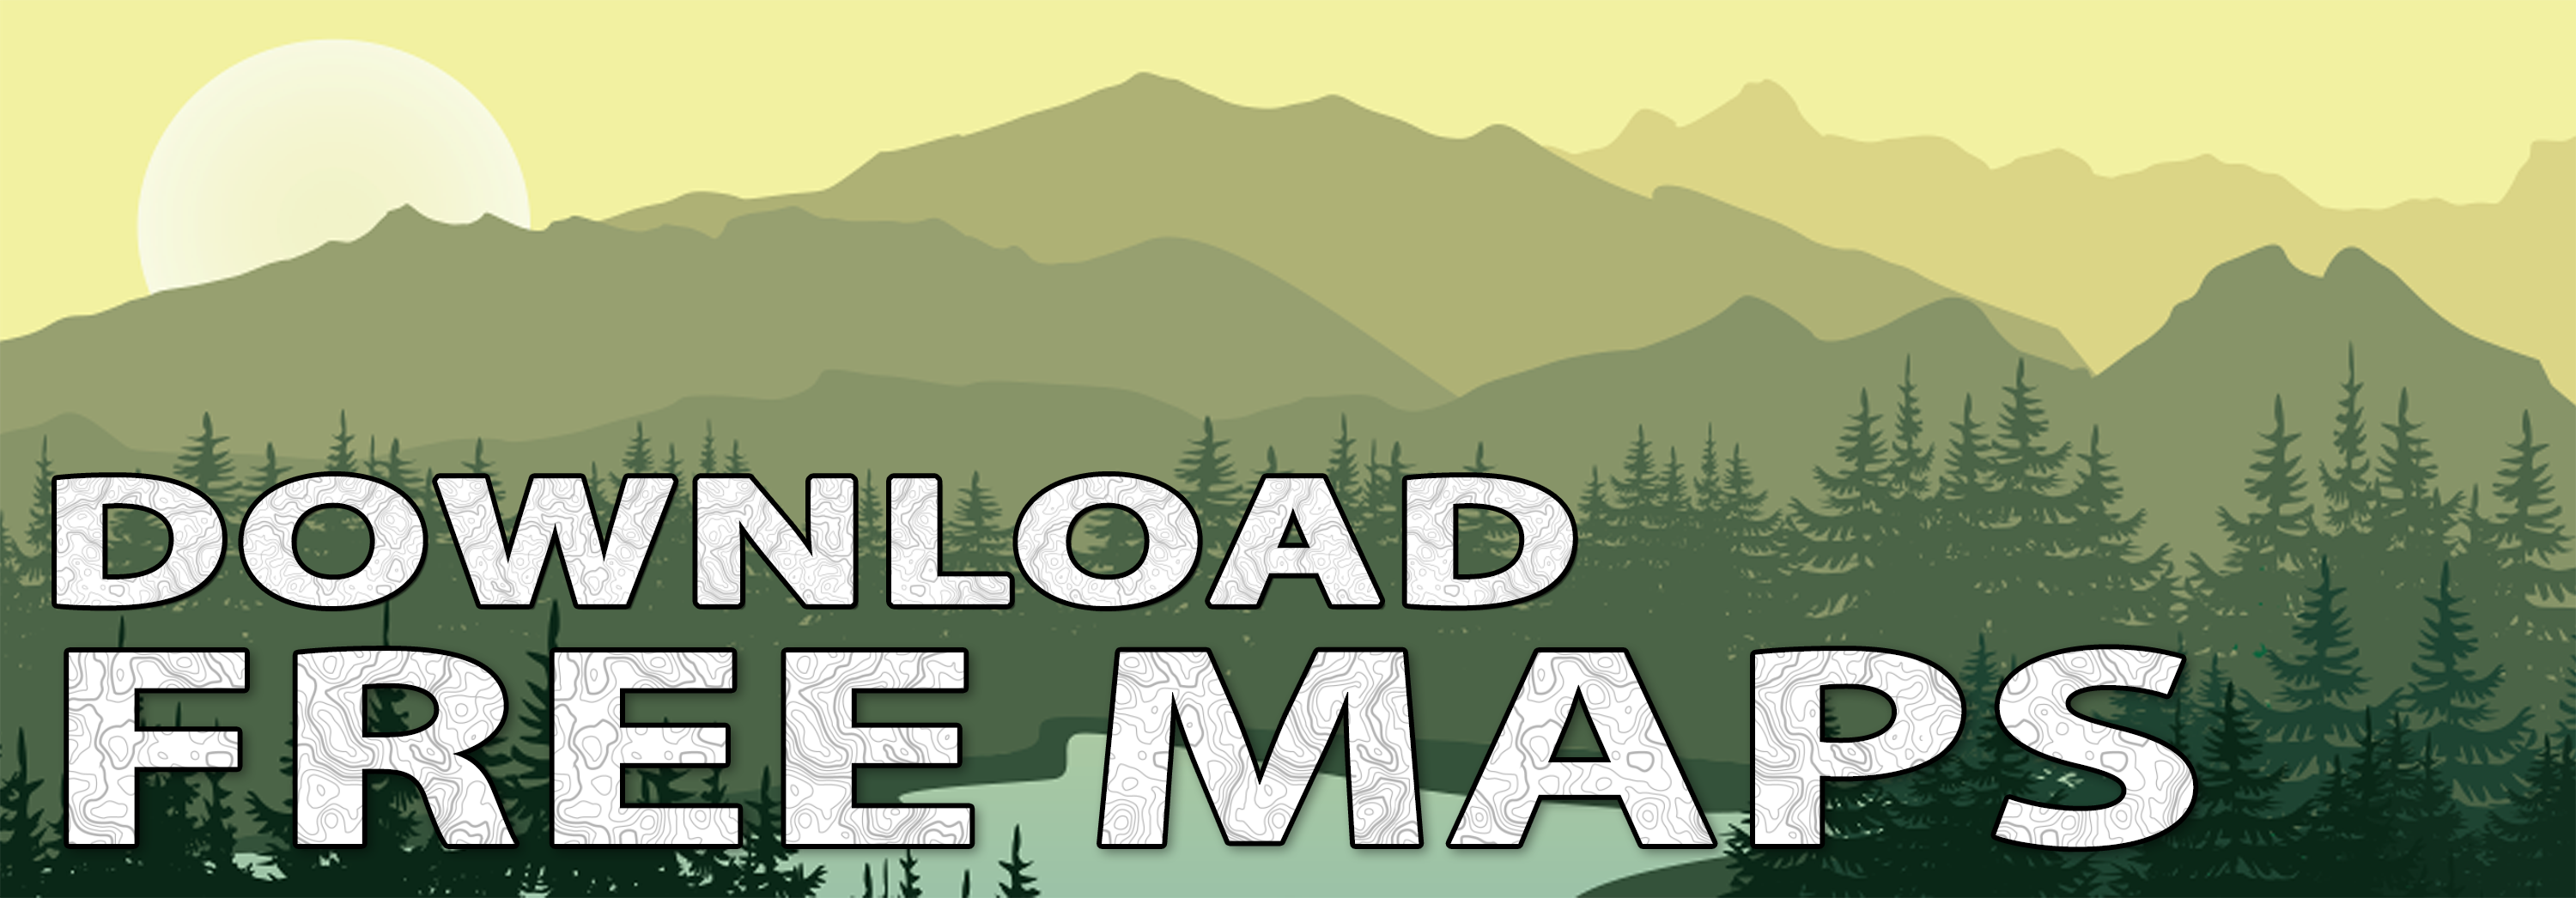 Download Free Maps by clicking this Banner.